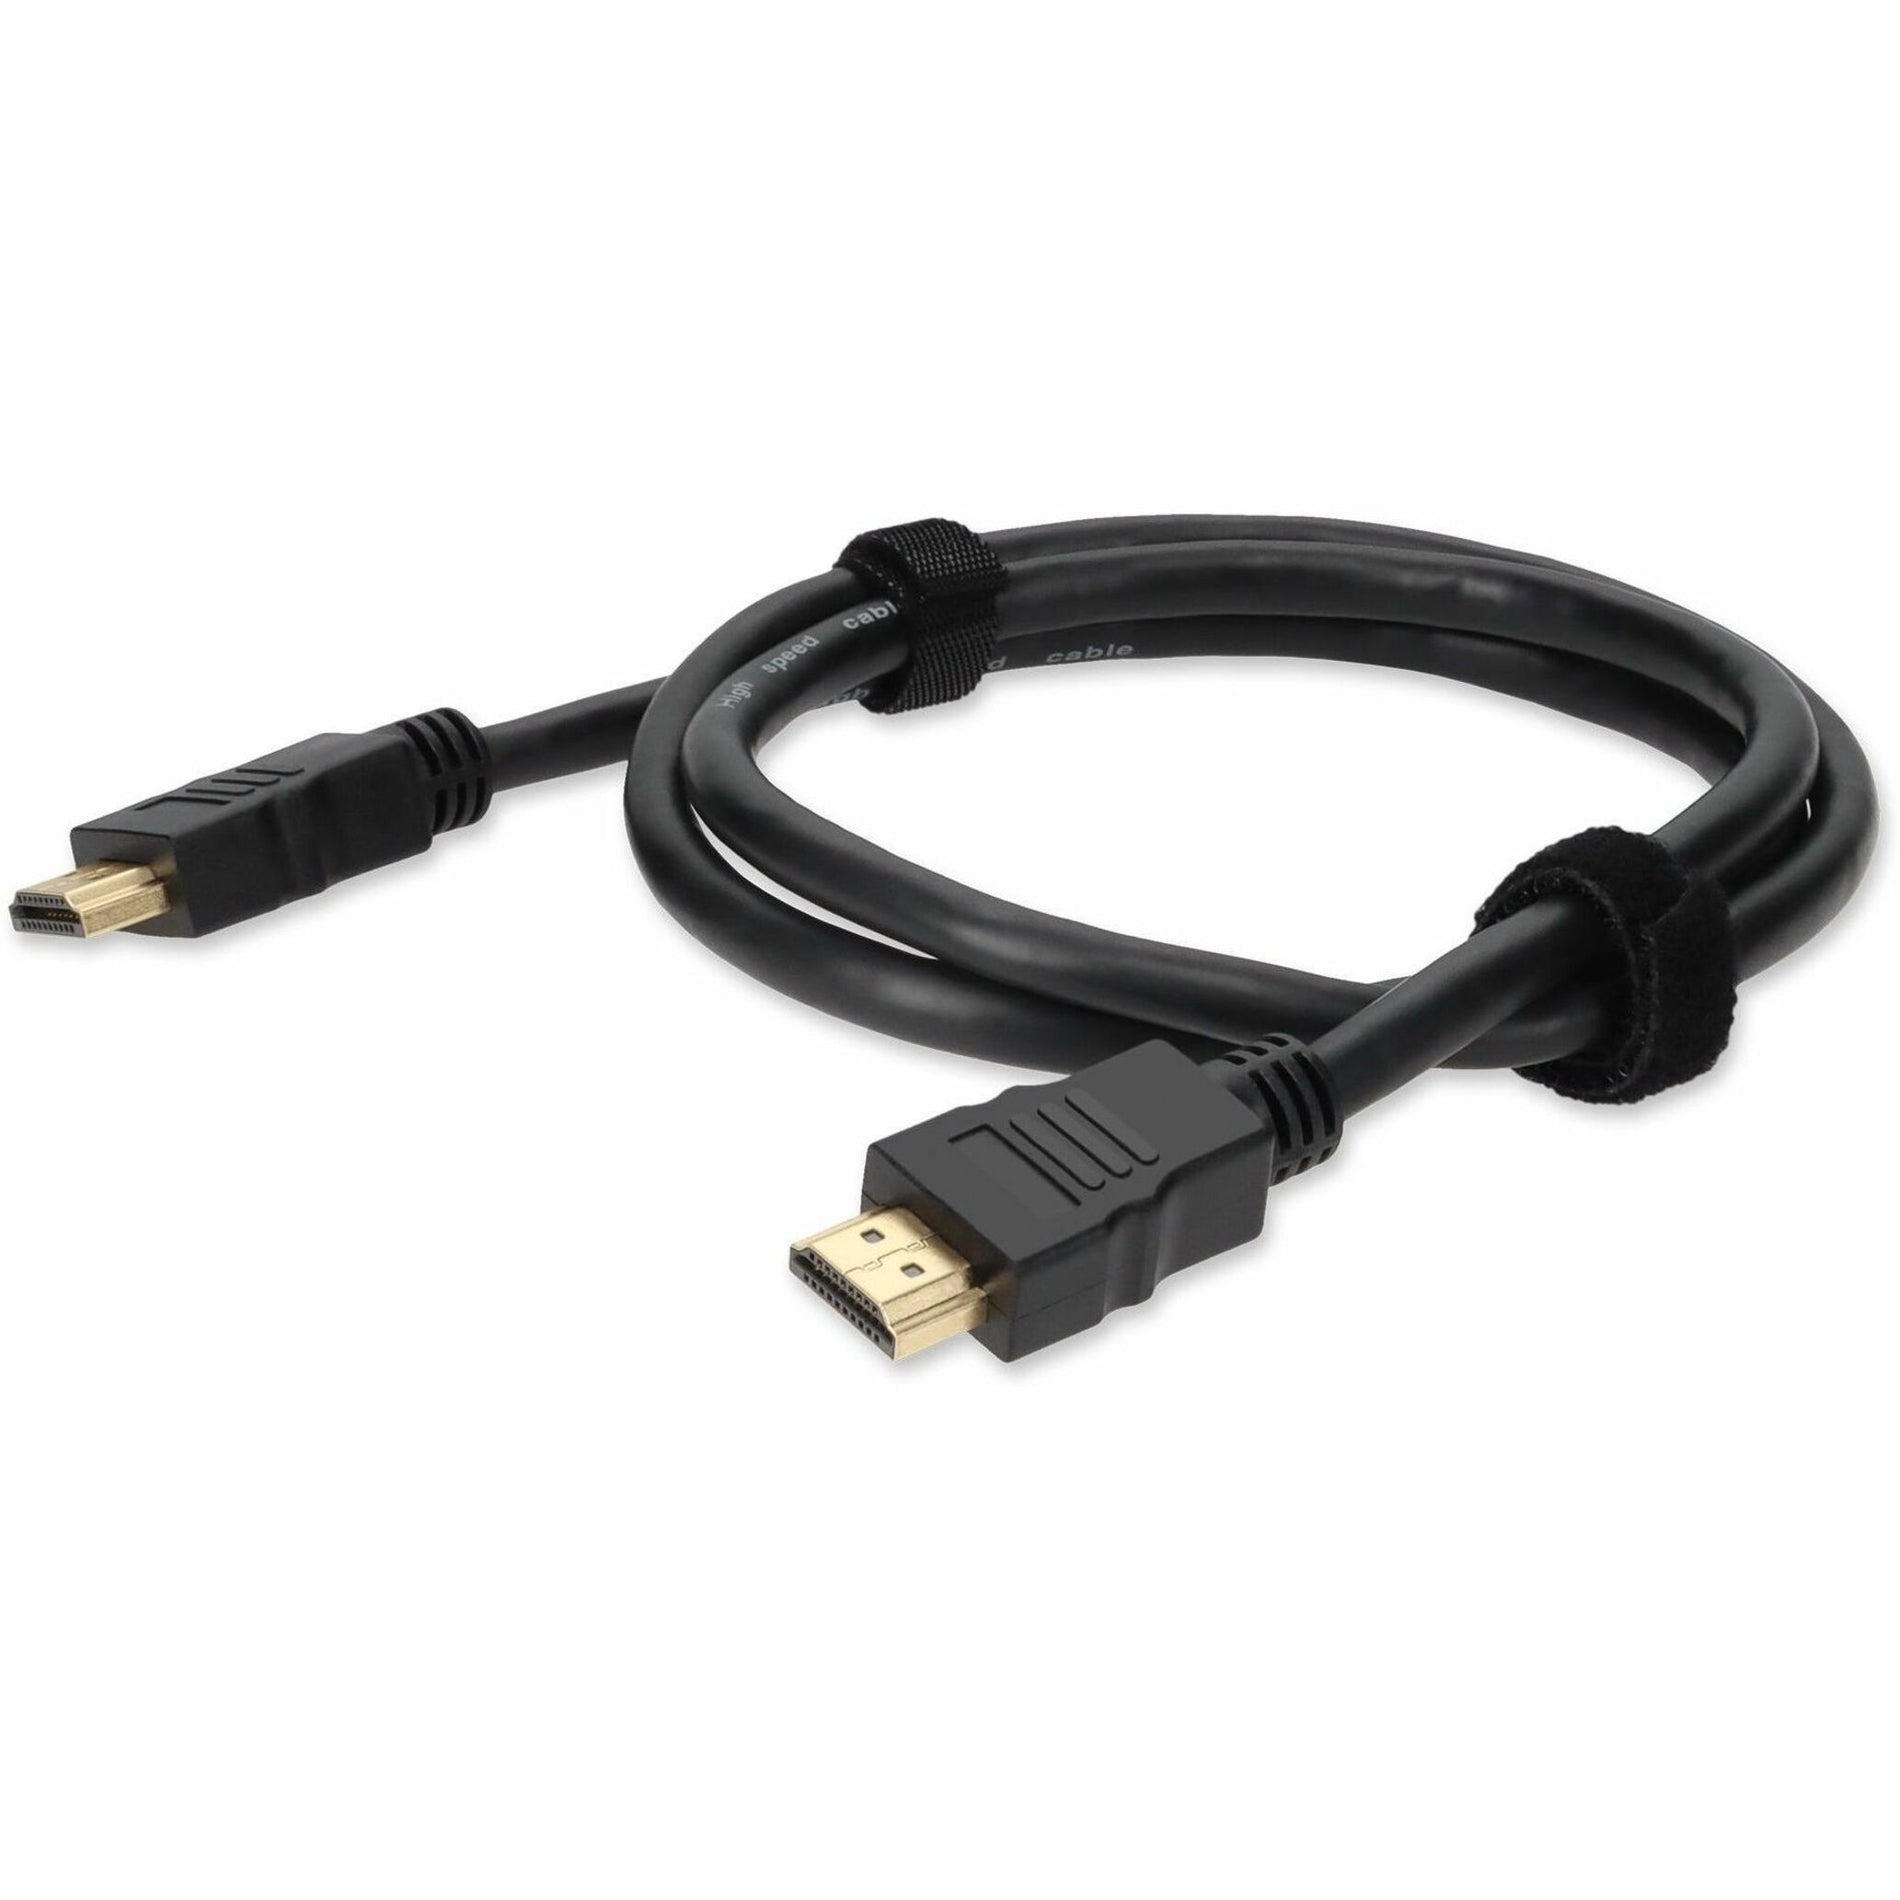 AddOn HDMIHSMM15 15ft HDMI 1.4 High Speed Cable w/Ethernet - Male to Male, 3 Year Warranty, United States